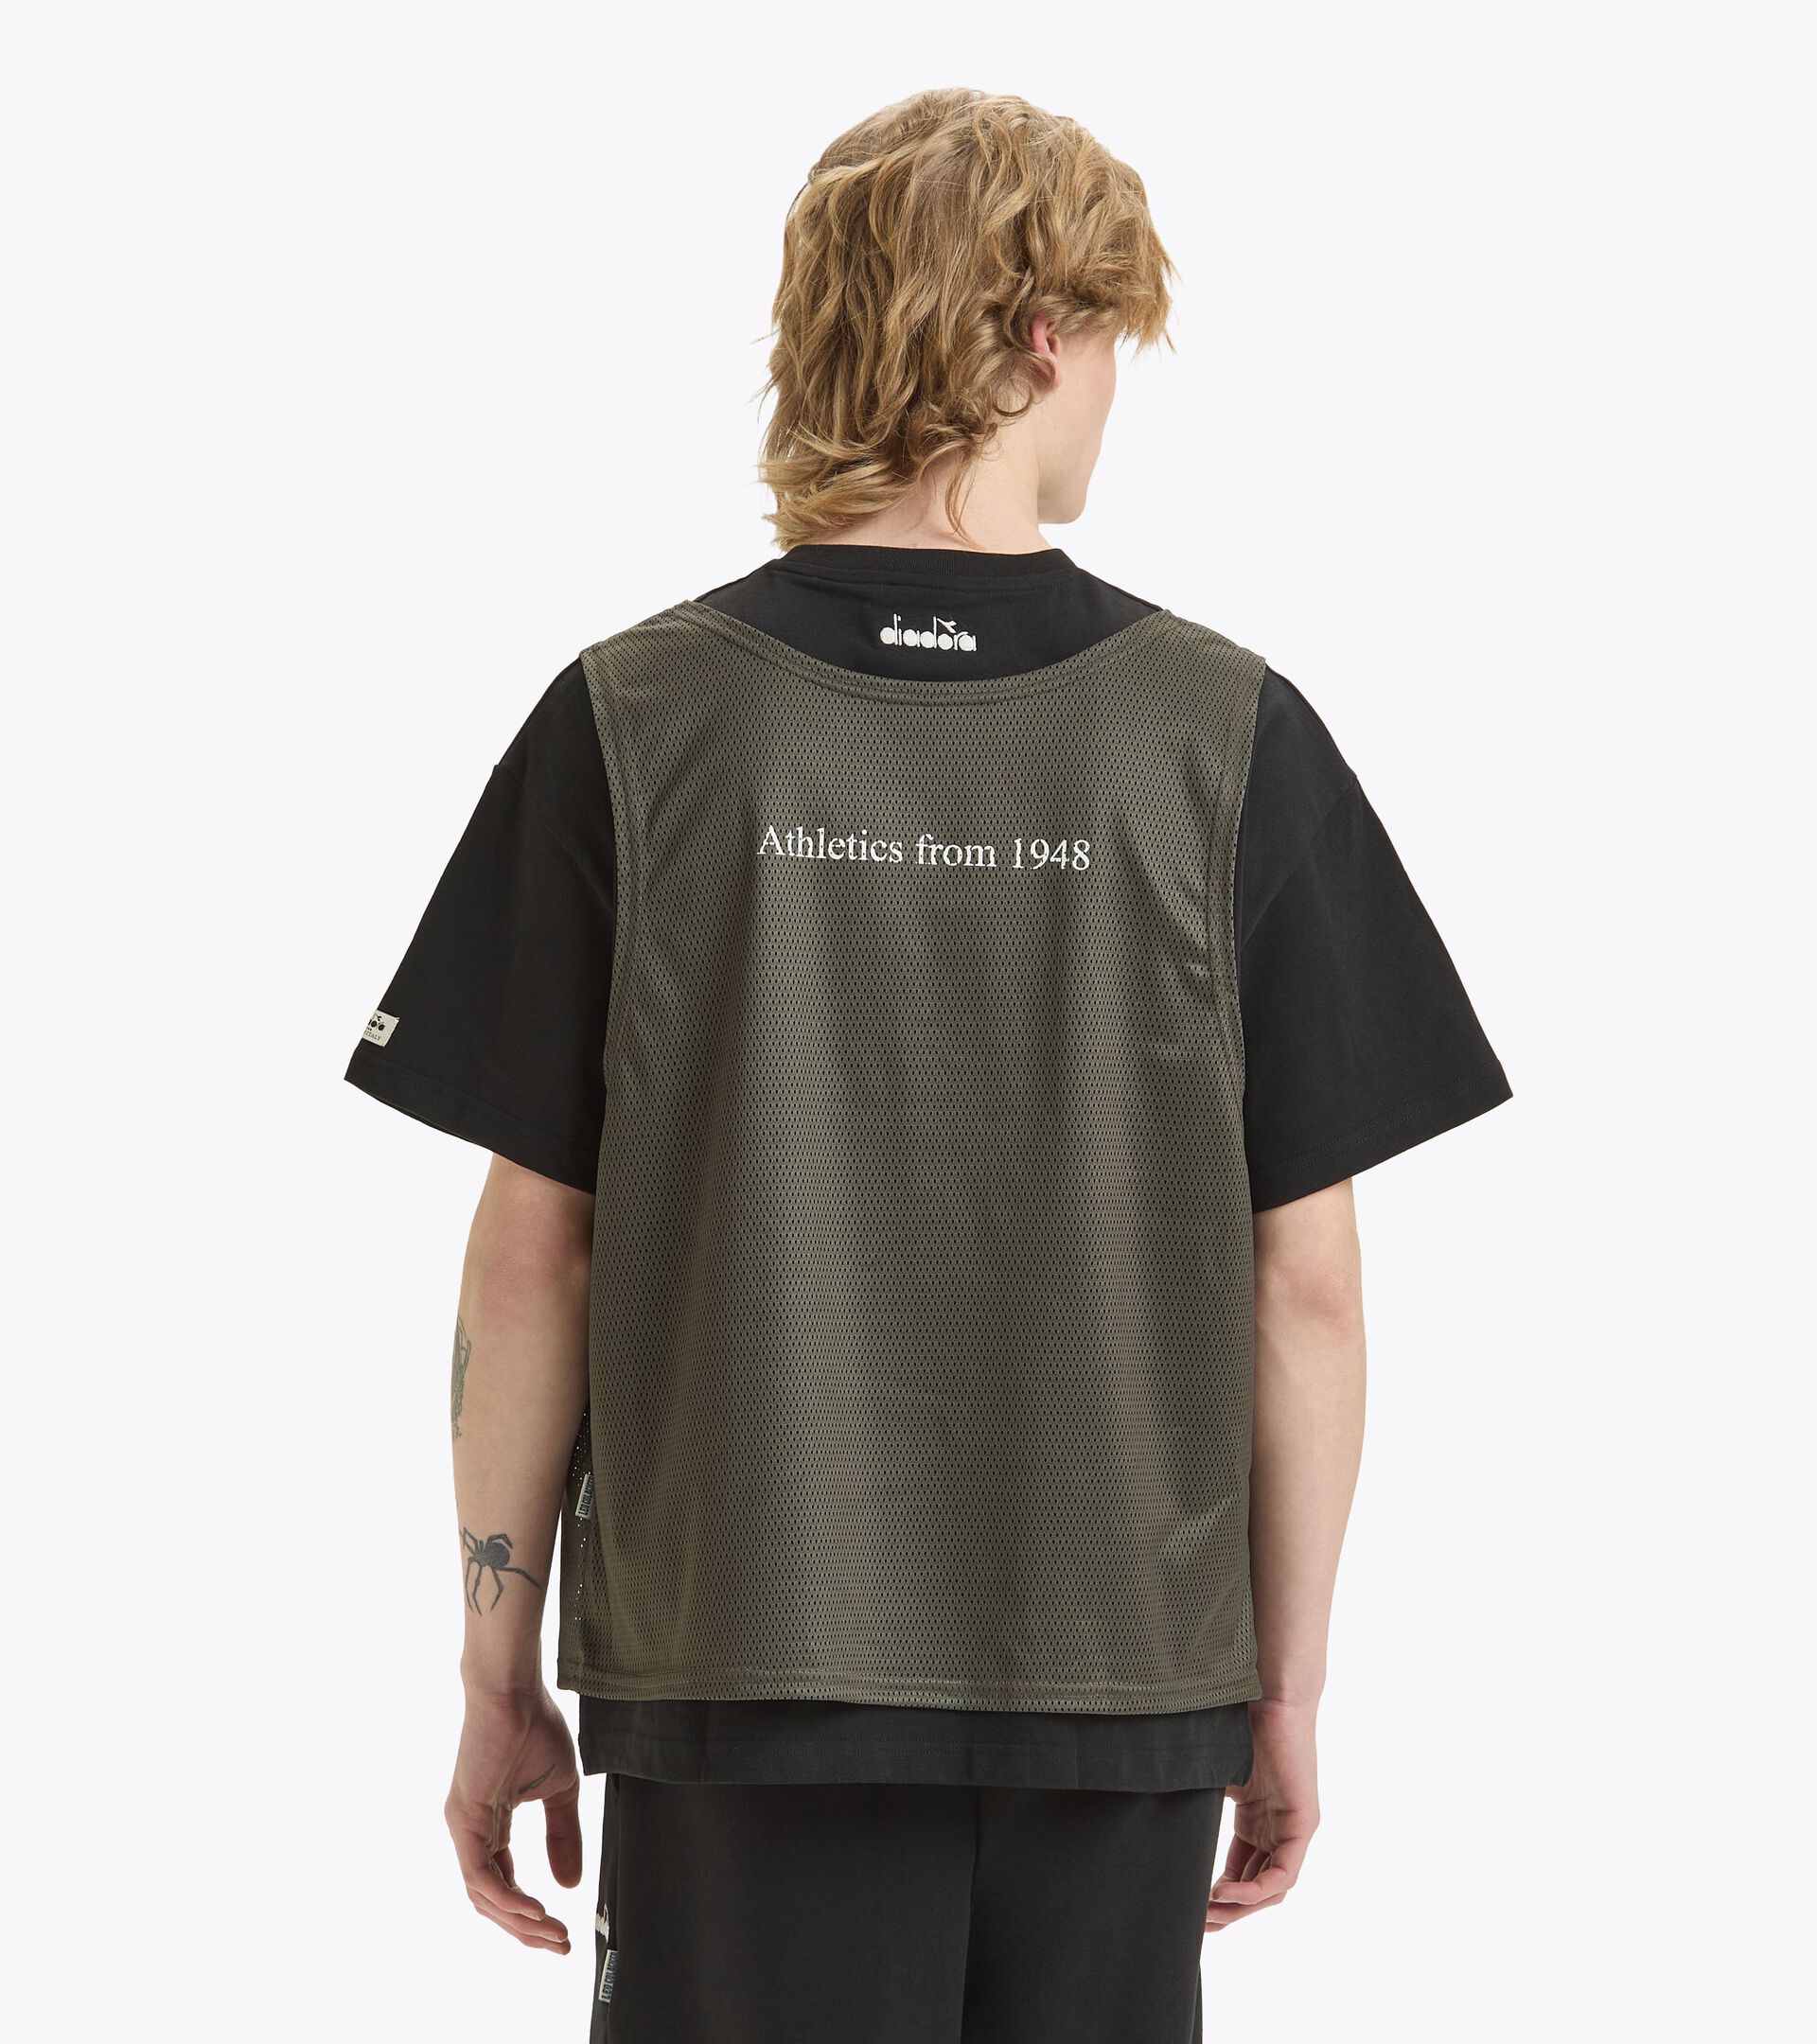 T-shirt e canotta 2 in 1 - Made in Italy - Gender Neutral
 T-SHIRT SS 2-IN-1 LEGACY VERDE KIWI - Diadora